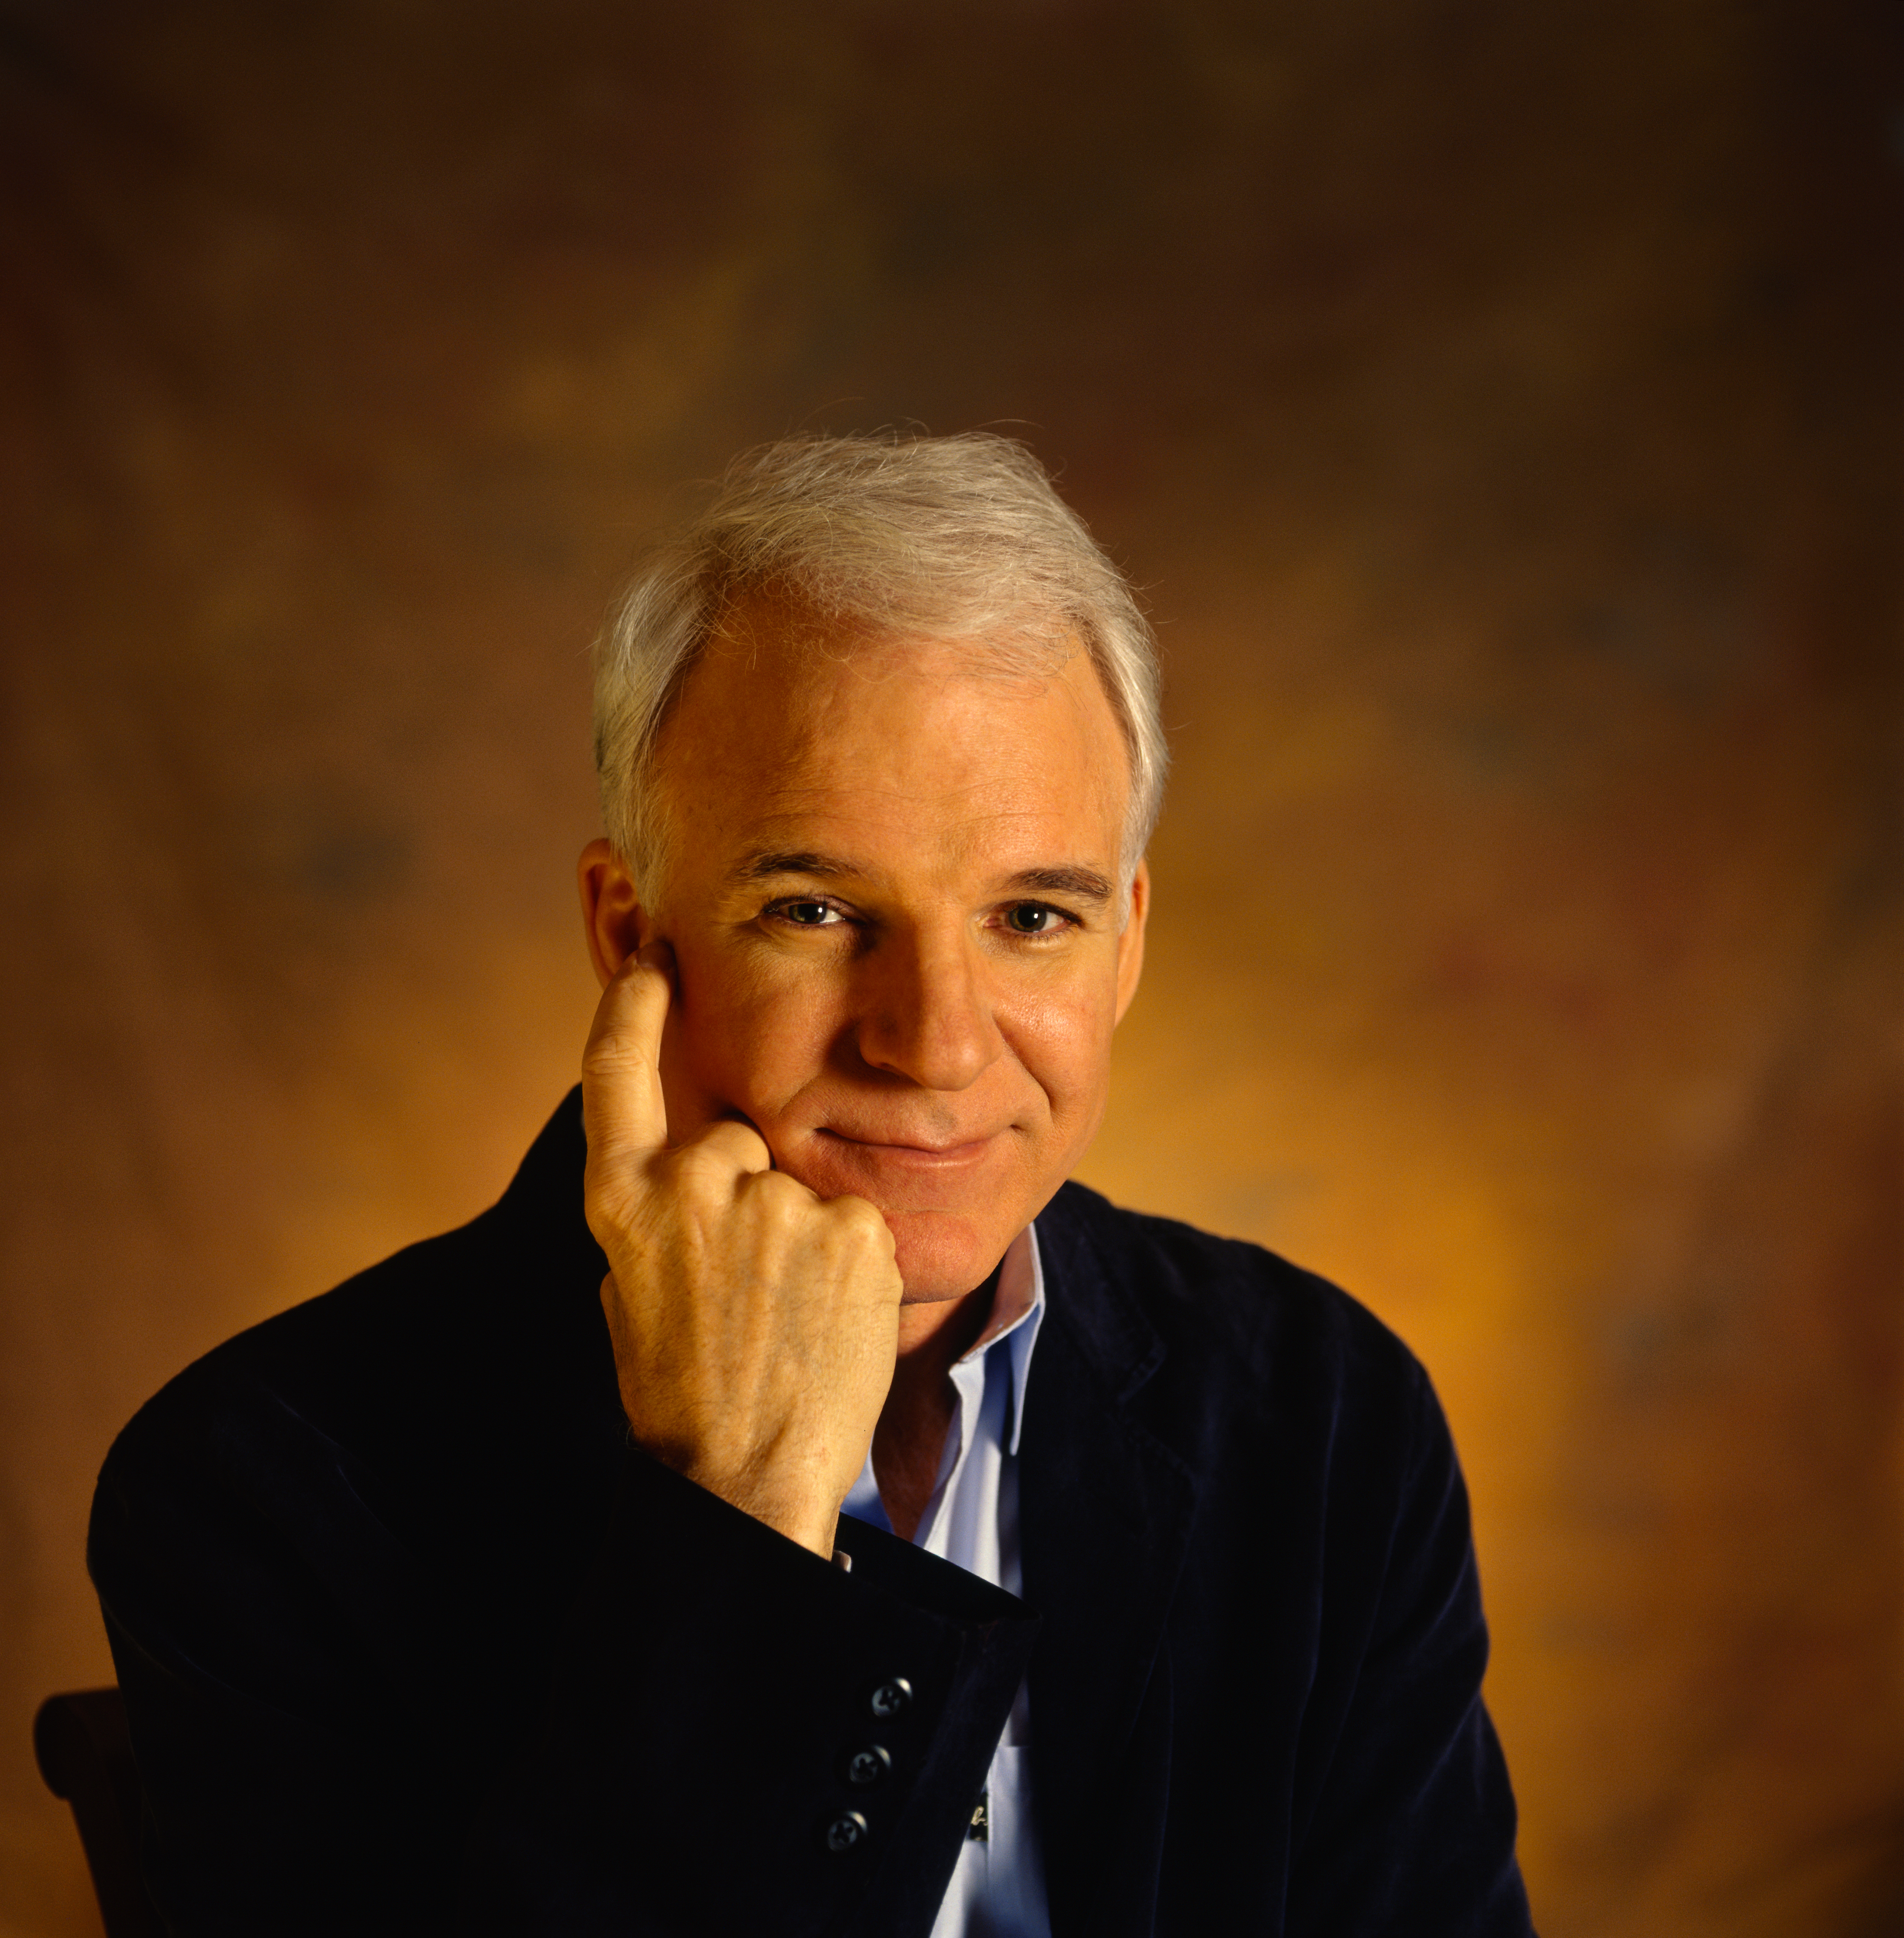 Steve Martin at an undisclosed location. | Source: Getty Images